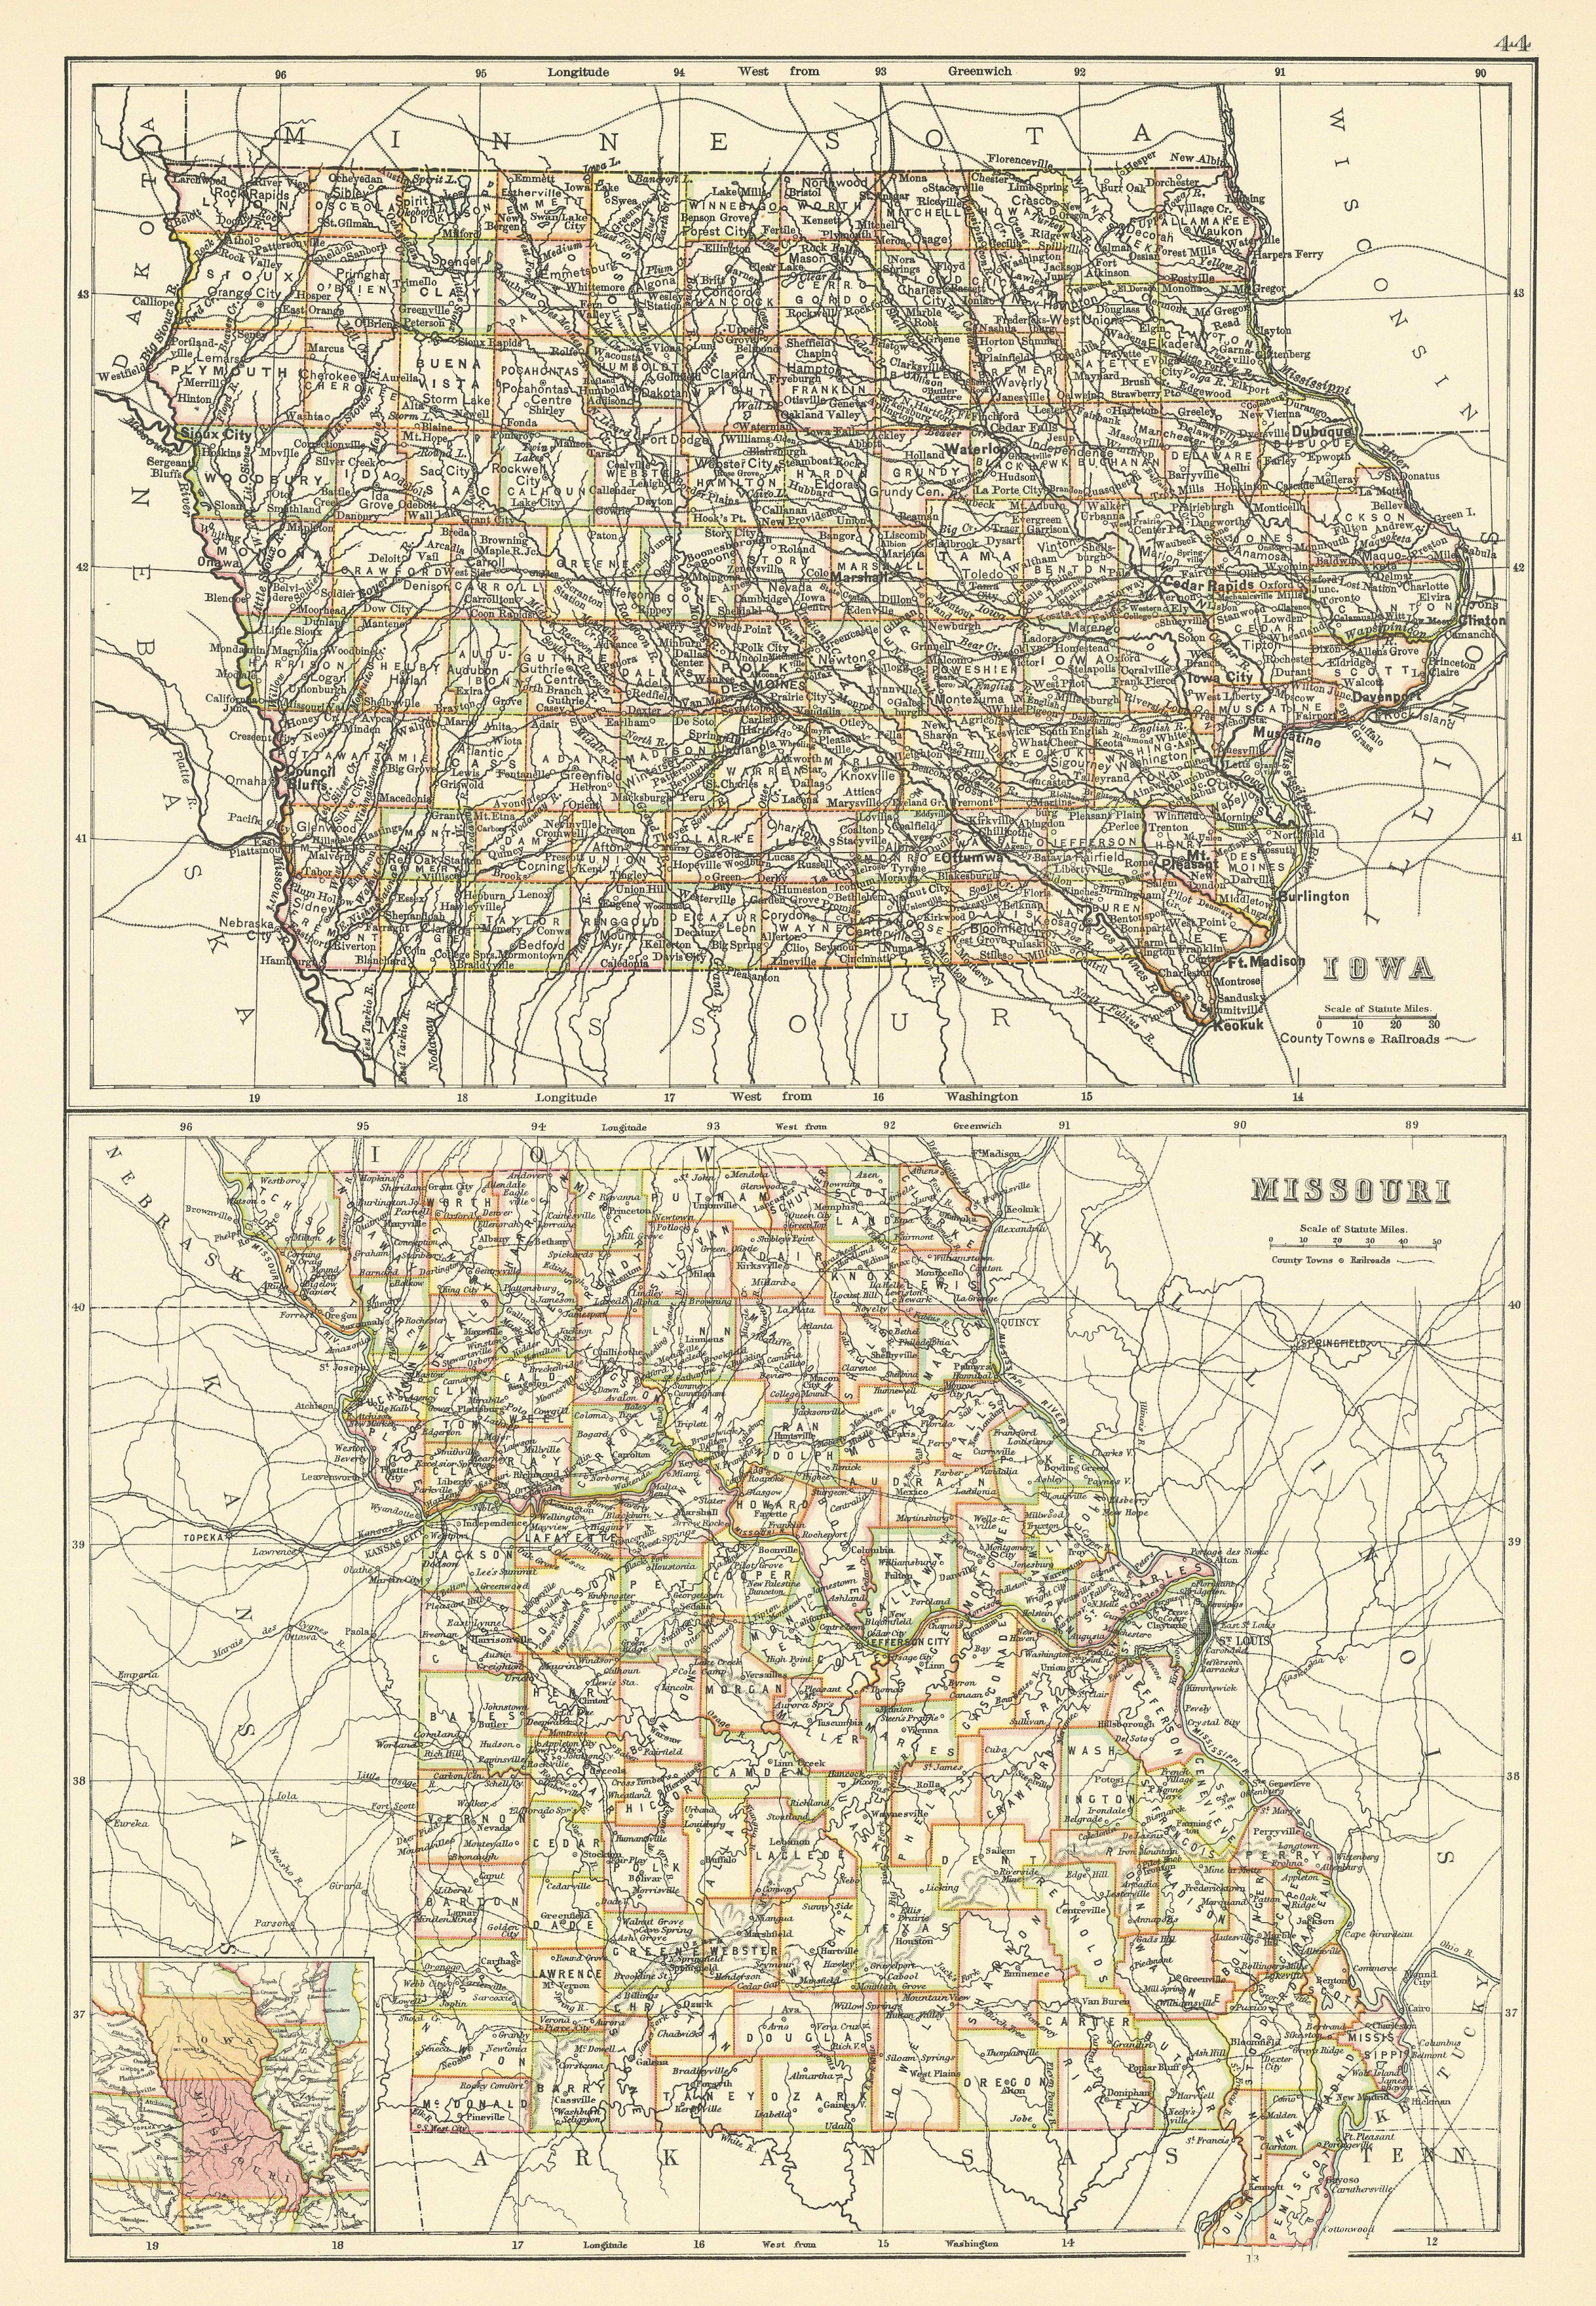 Associate Product Iowa and Missouri state maps showing counties. BARTHOLOMEW 1898 old